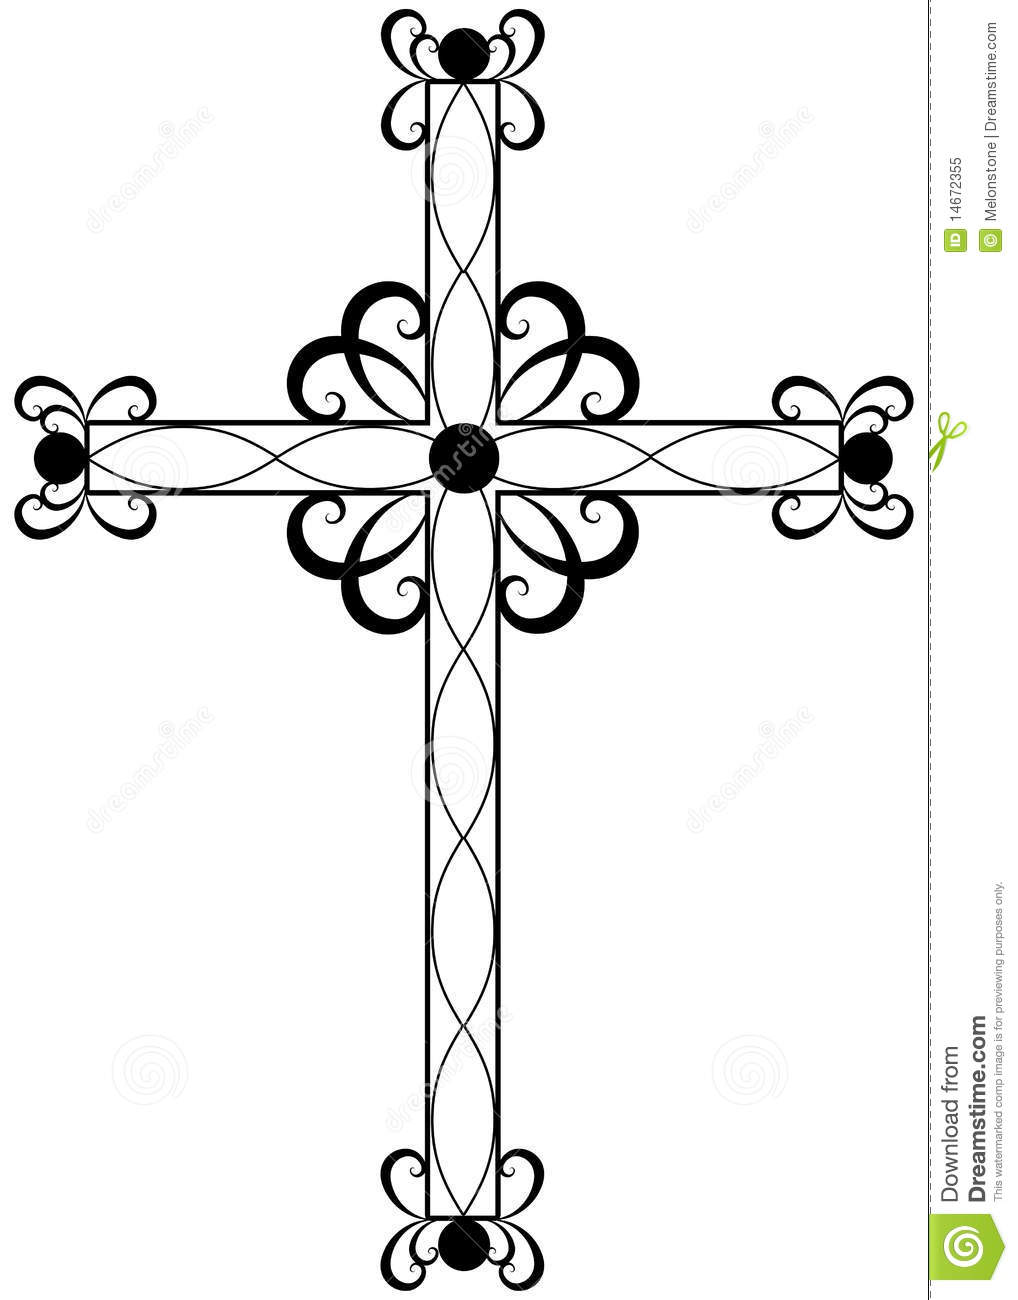 Traditional Ornate Religious Cross Royalty Free Stock Photo   Image    